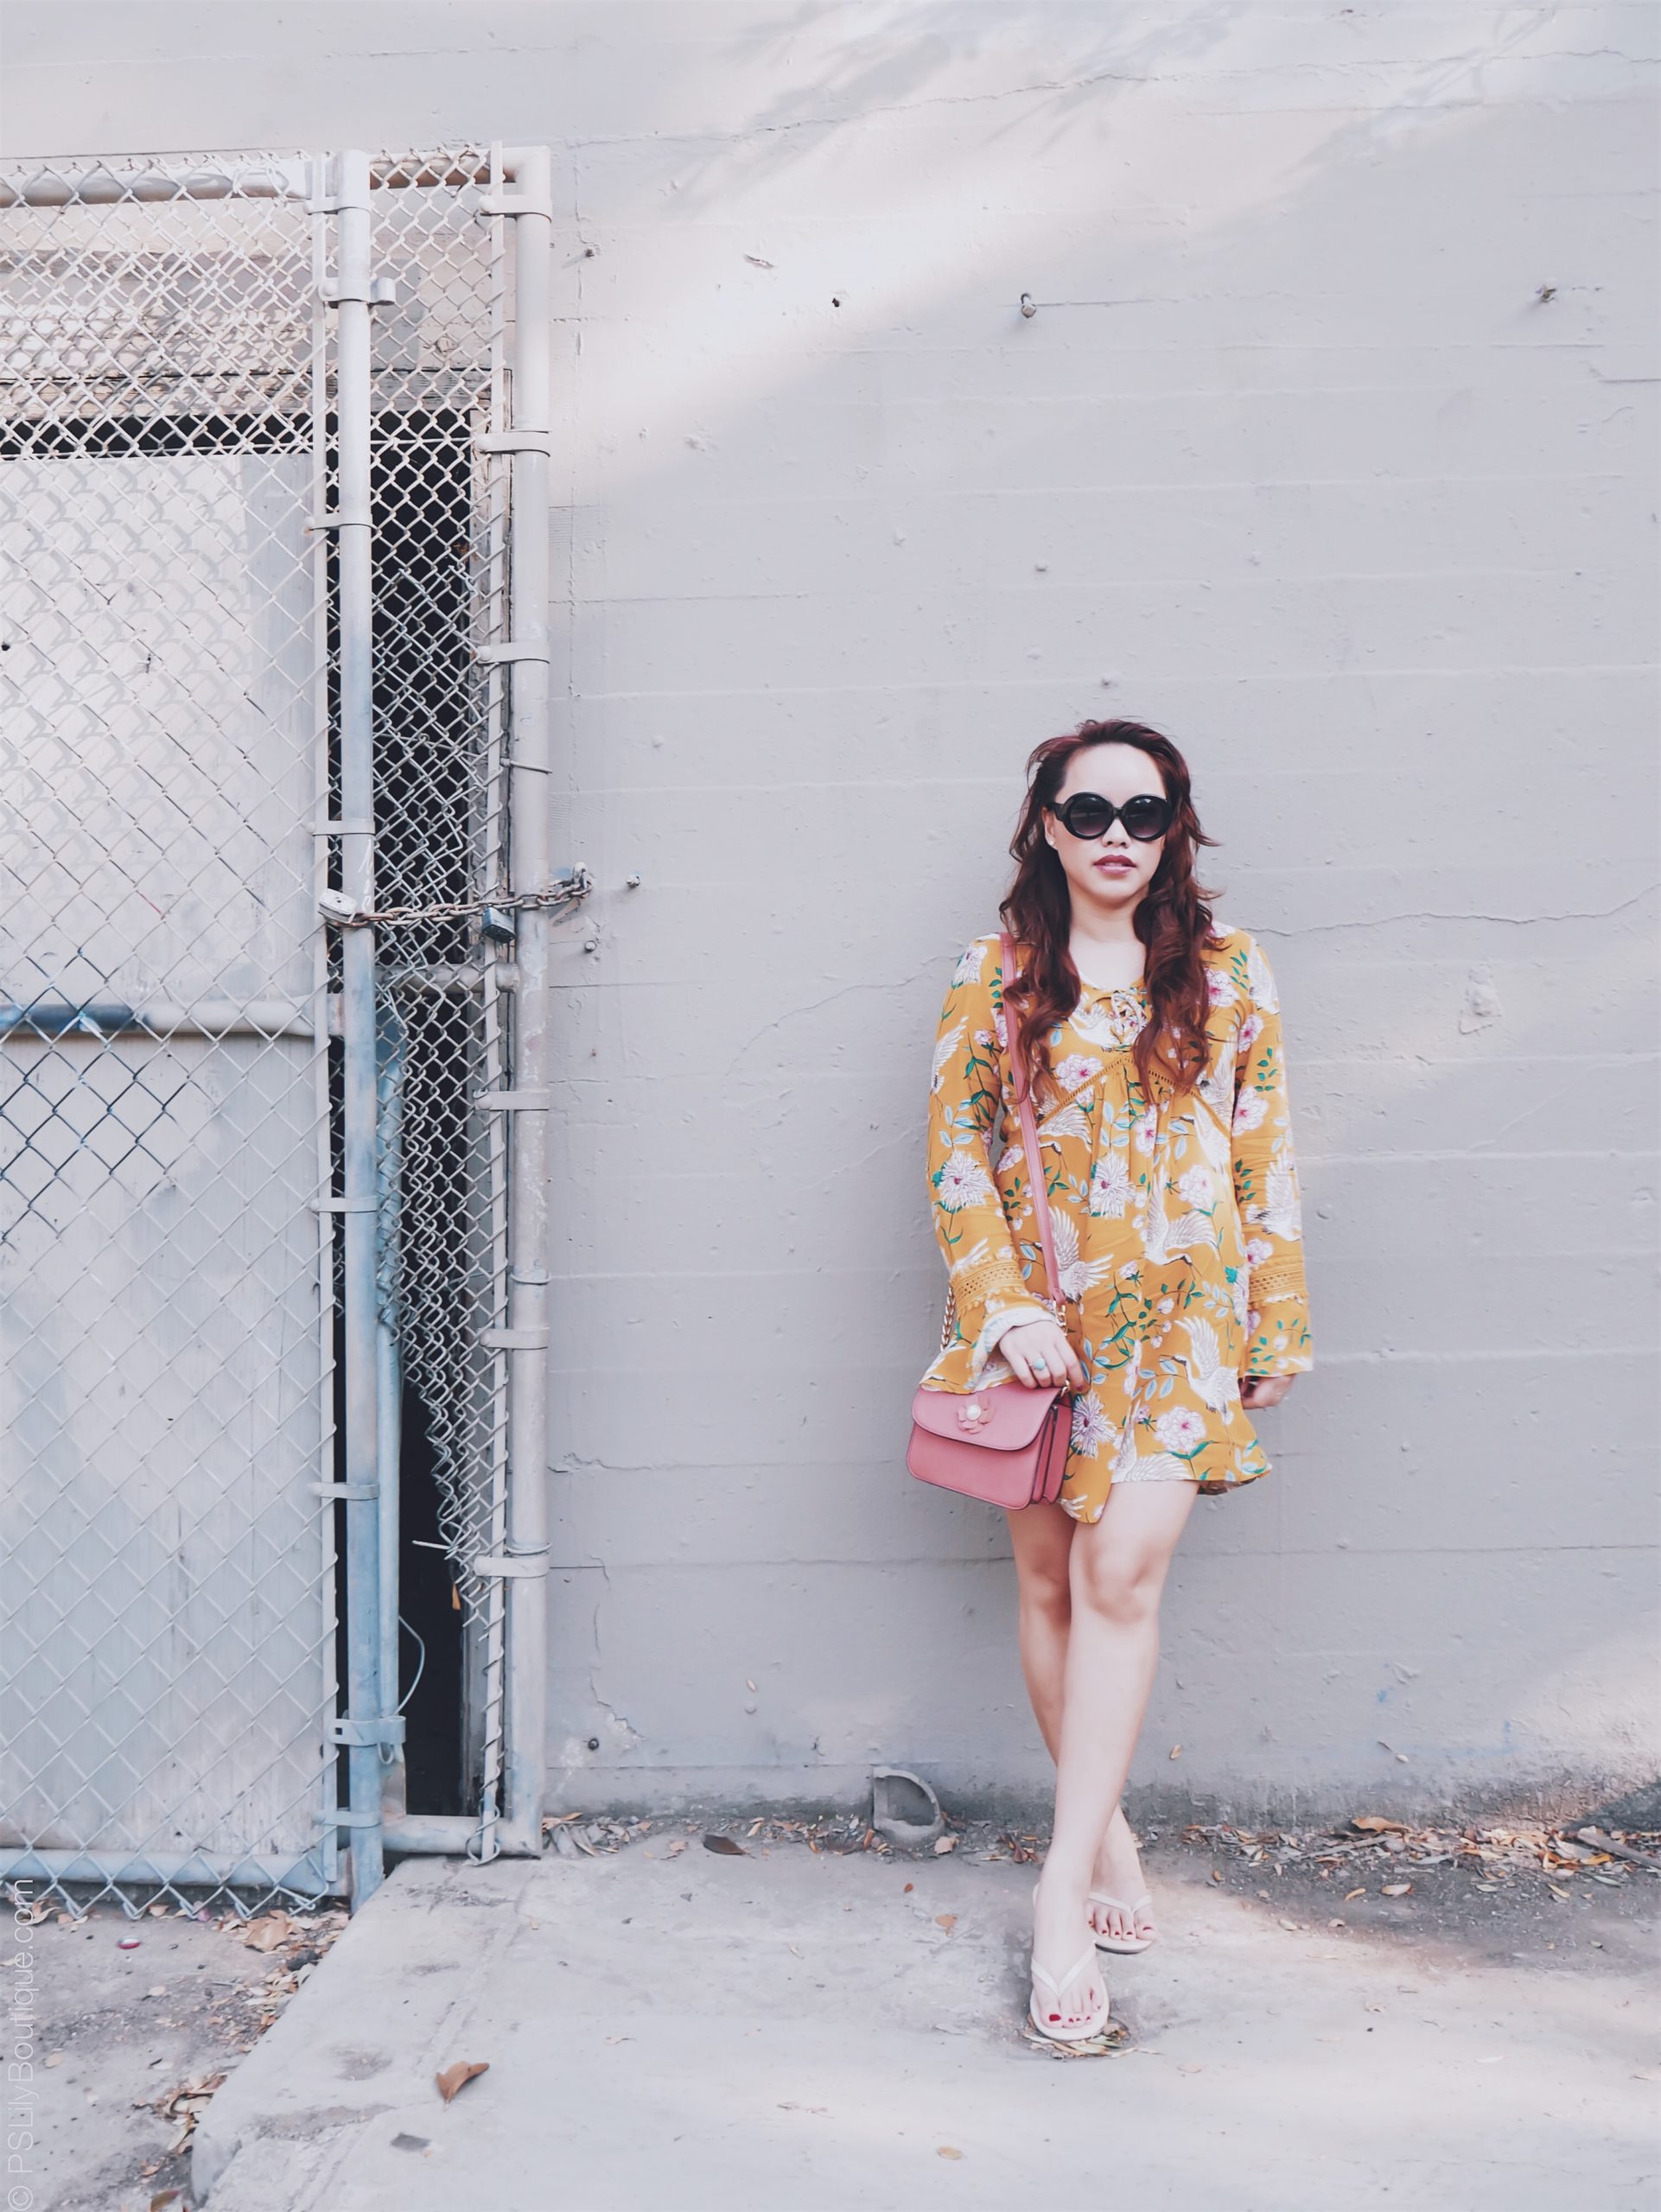 Like a bird... | PSLily Boutique - A Fashion & Personal Style Blog. Instagram: @pslilyboutique, Pinterest, Los Angeles fashion blogger, top fashion blog, best fashion blog, fashion & personal style blog, travel blog, travel blogger, LA fashion blogger, Sam Edelman Nude Beige Slip- Ons Sandals Shoes, Spring & Summer 2018 Outfit ideas, yellow dress, floral & bird print dress, Andrew Marc Salmon Pink Flower Detail Mini Bag, Long Hair, Beauty, My Style, 7.20.18